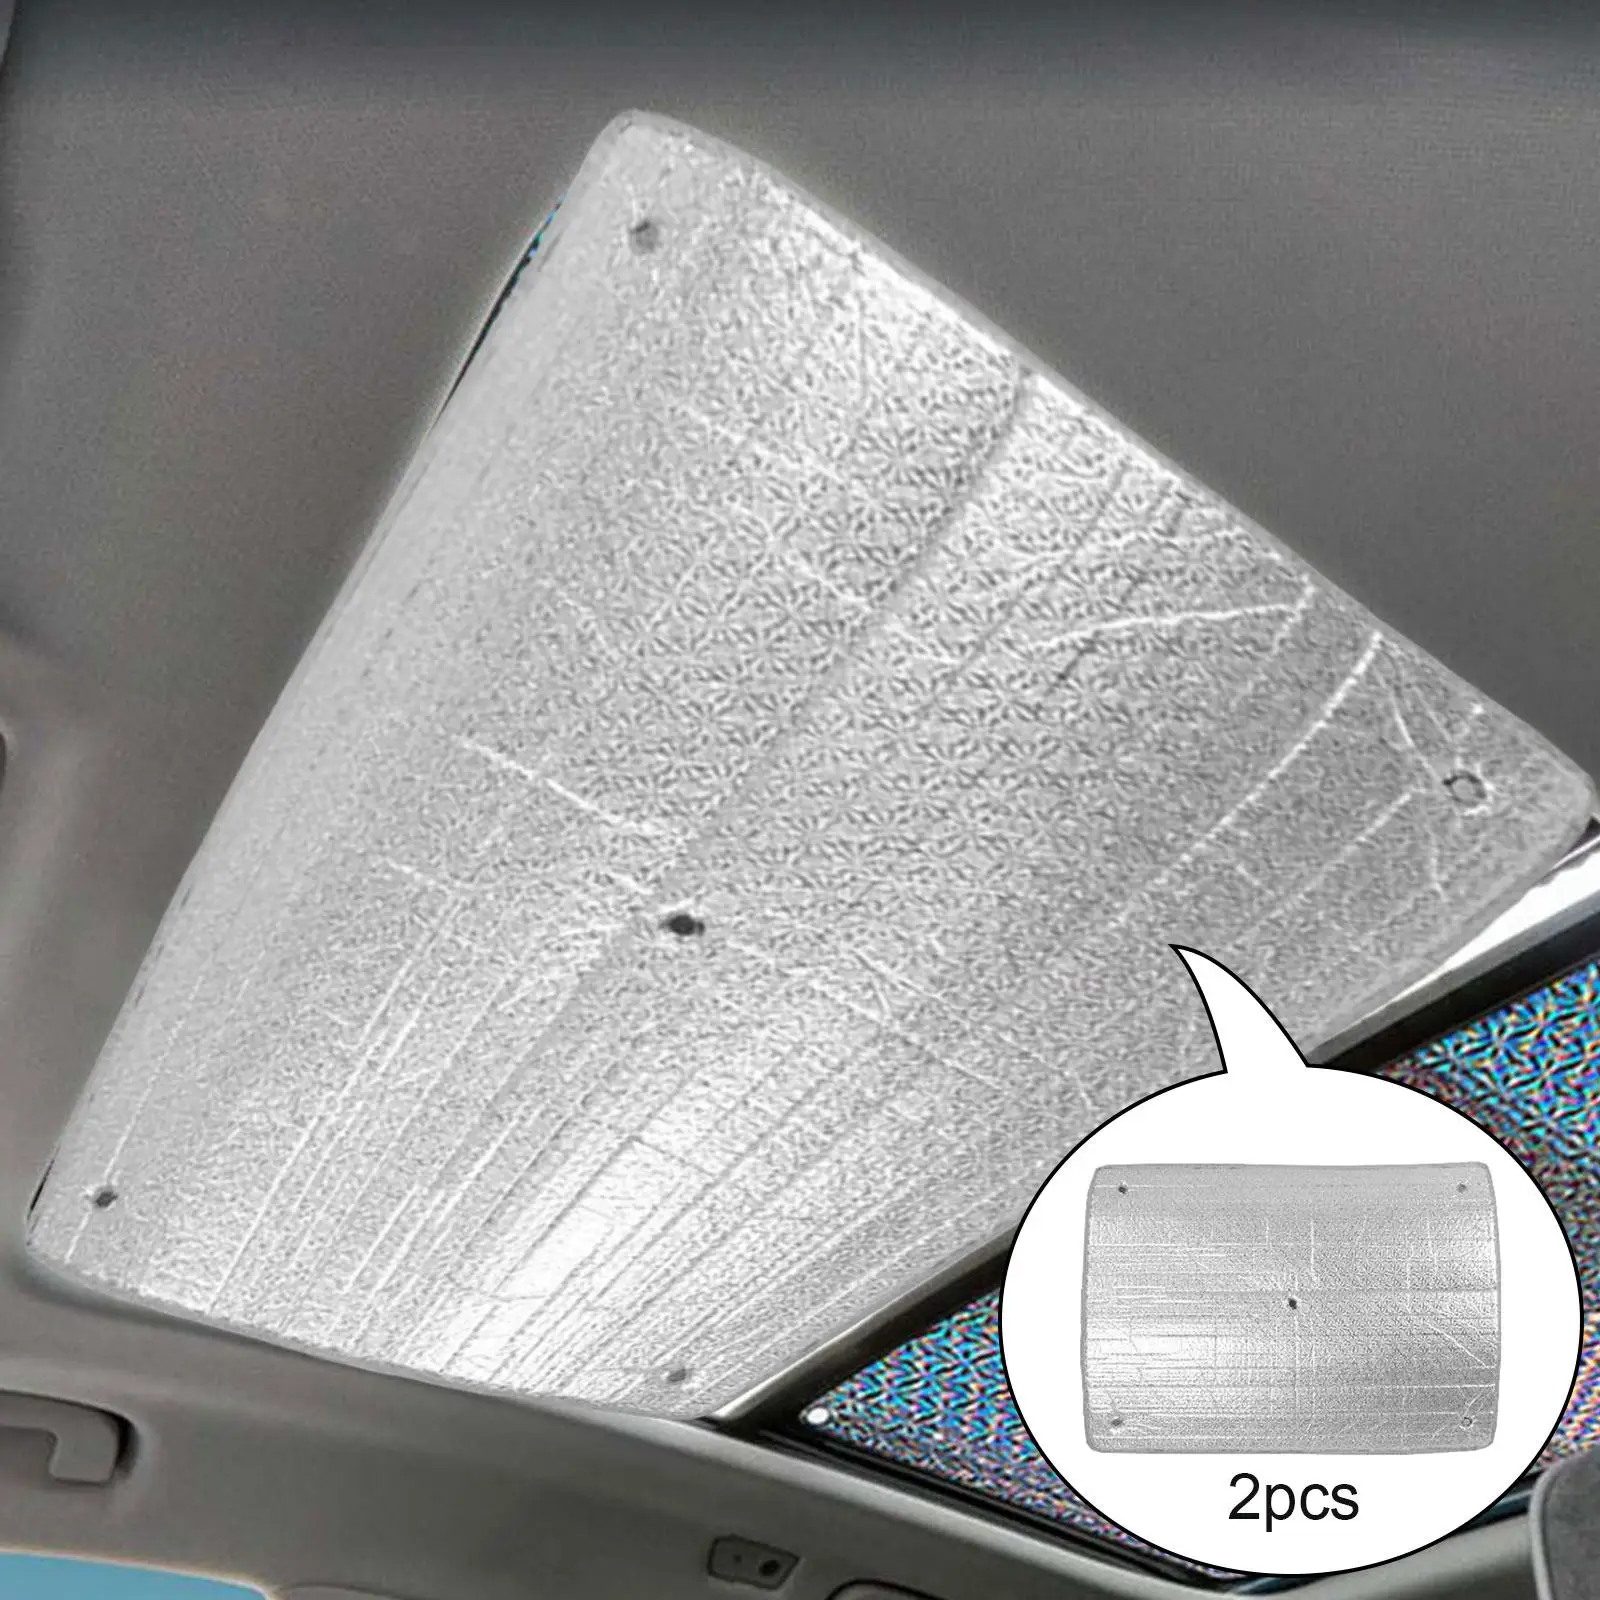 2x Car Inside Roof Sunshade sun protection for Byd Atto 3 Vehicle Spare Parts for Protecting Passengers from Heat and Glare